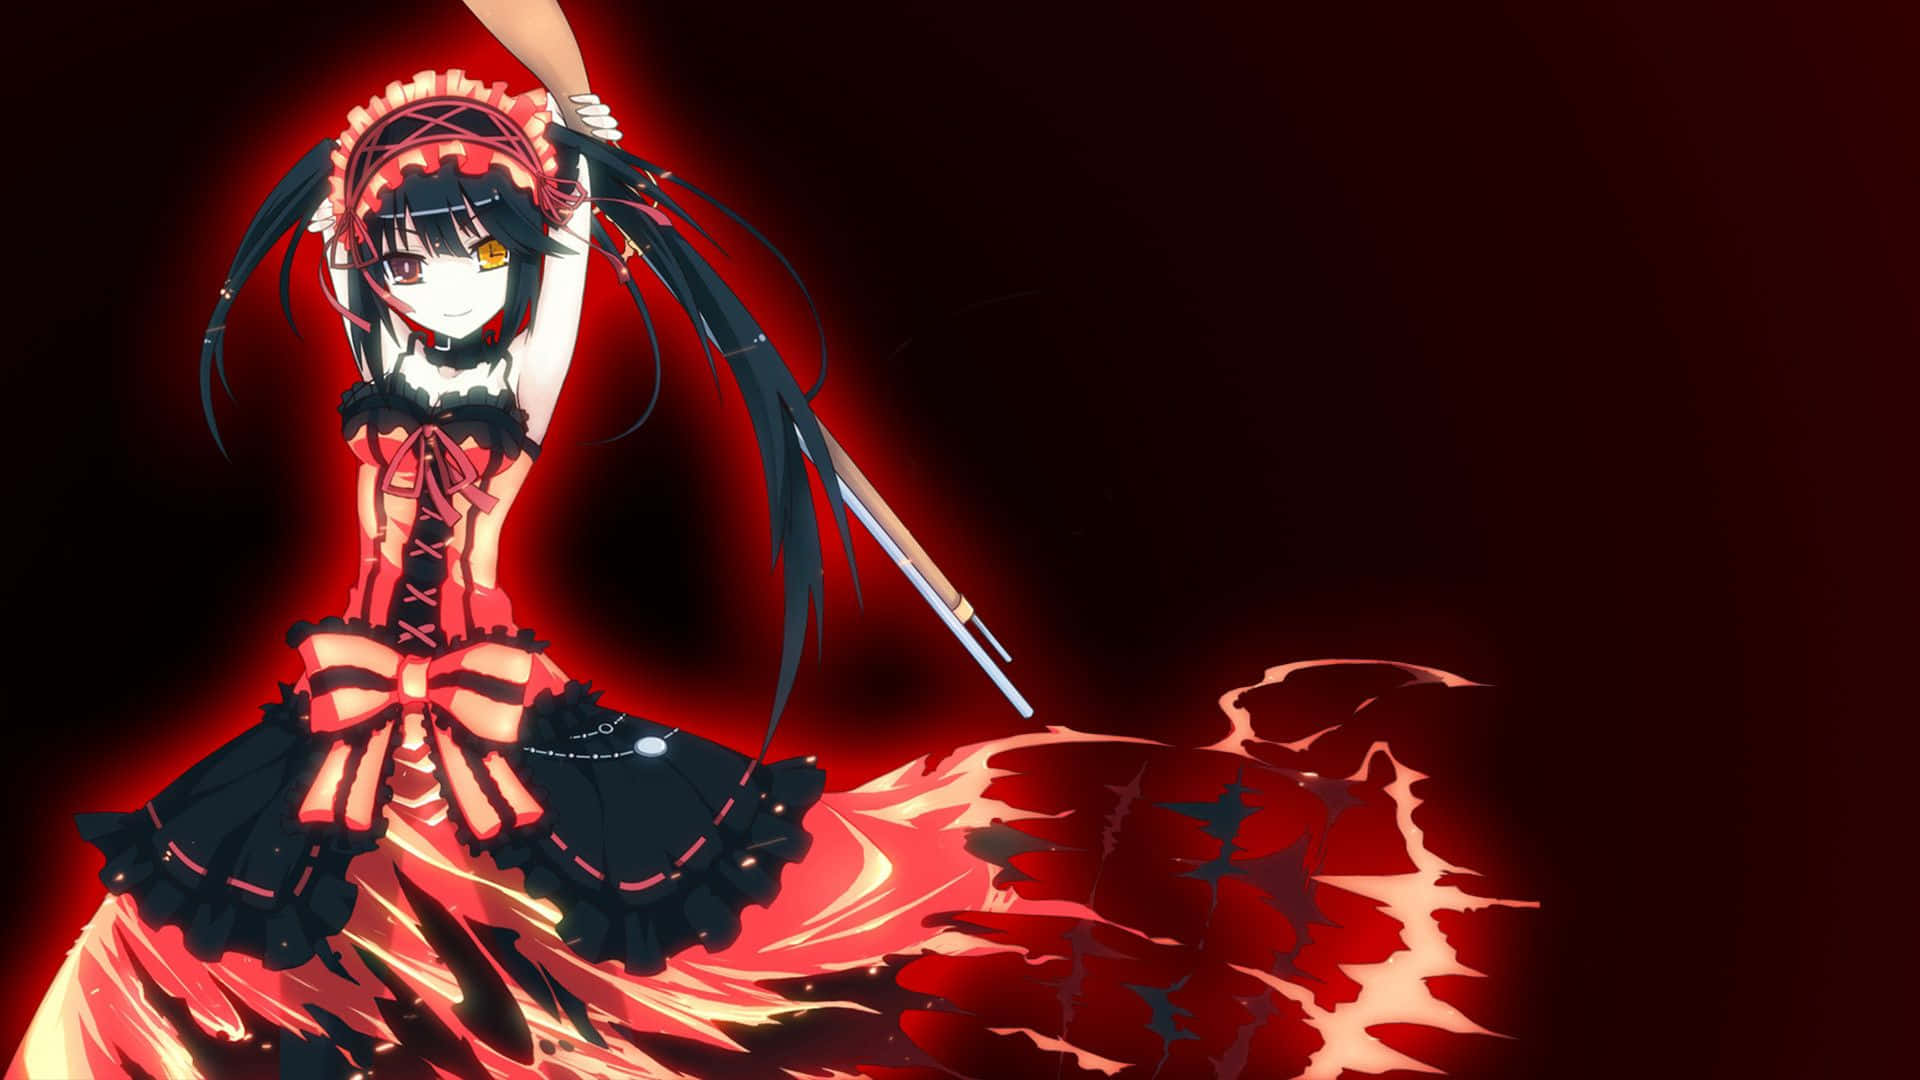 A mysterious anime drawing of a silhouette in a black and red colour scheme Wallpaper